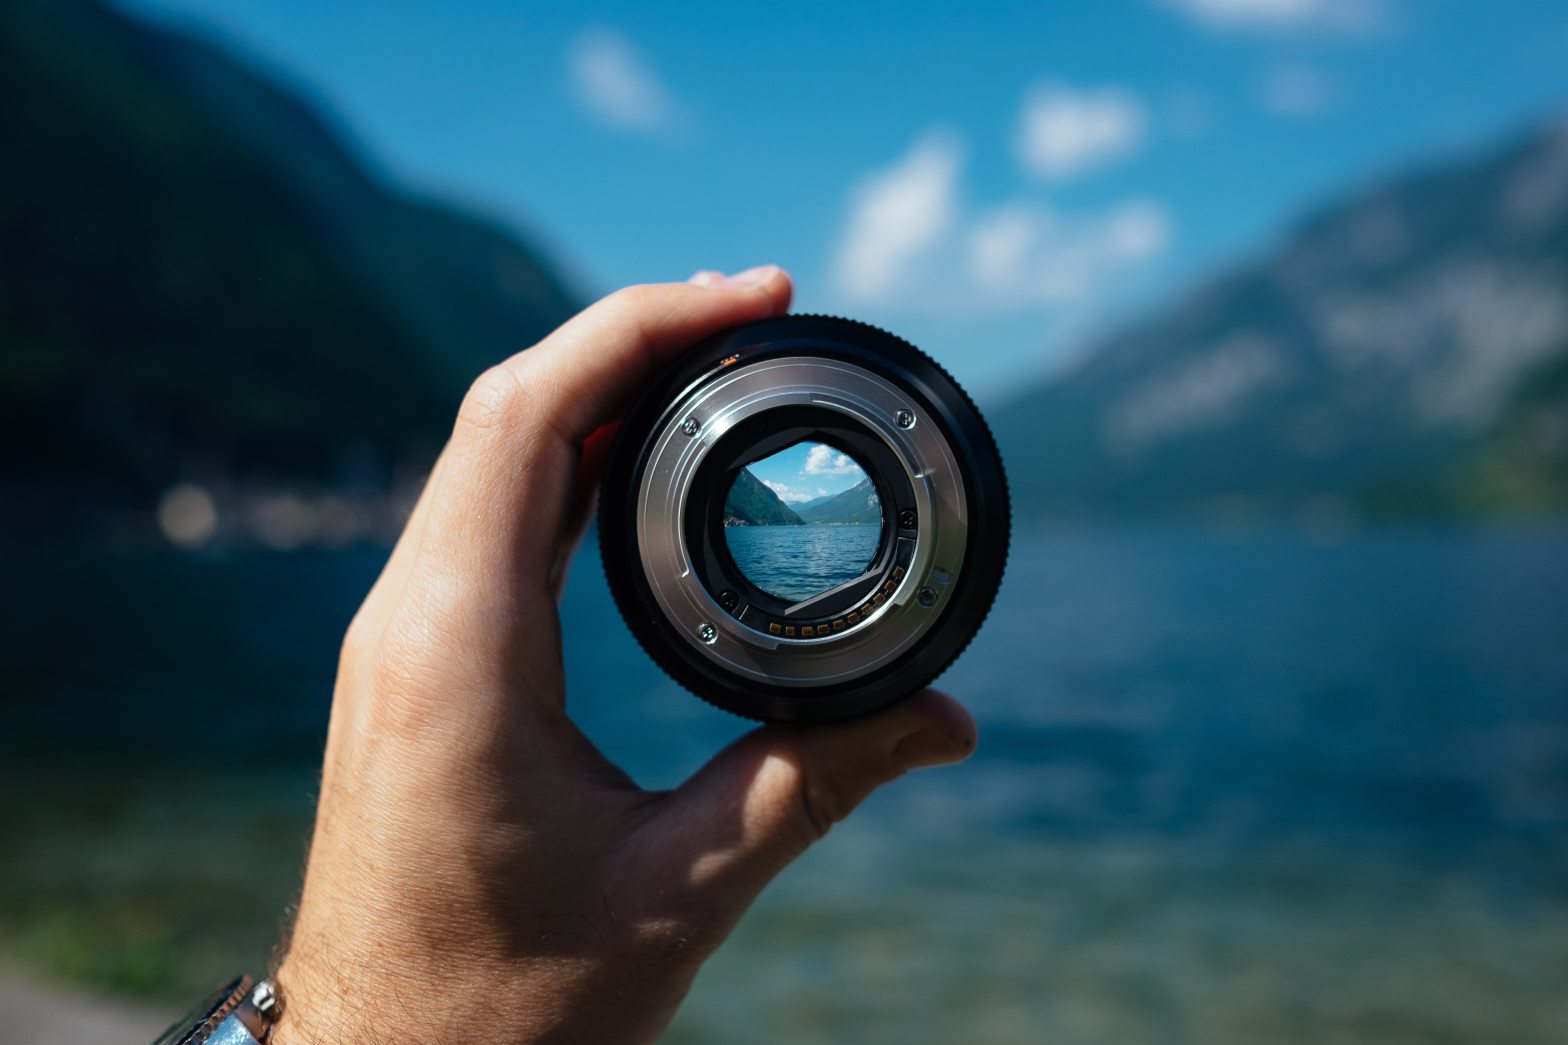 image of a hand holding a camera's lens, in front of a lake. Through the lens, the lake looks clear with the scene outside of the lens blurry